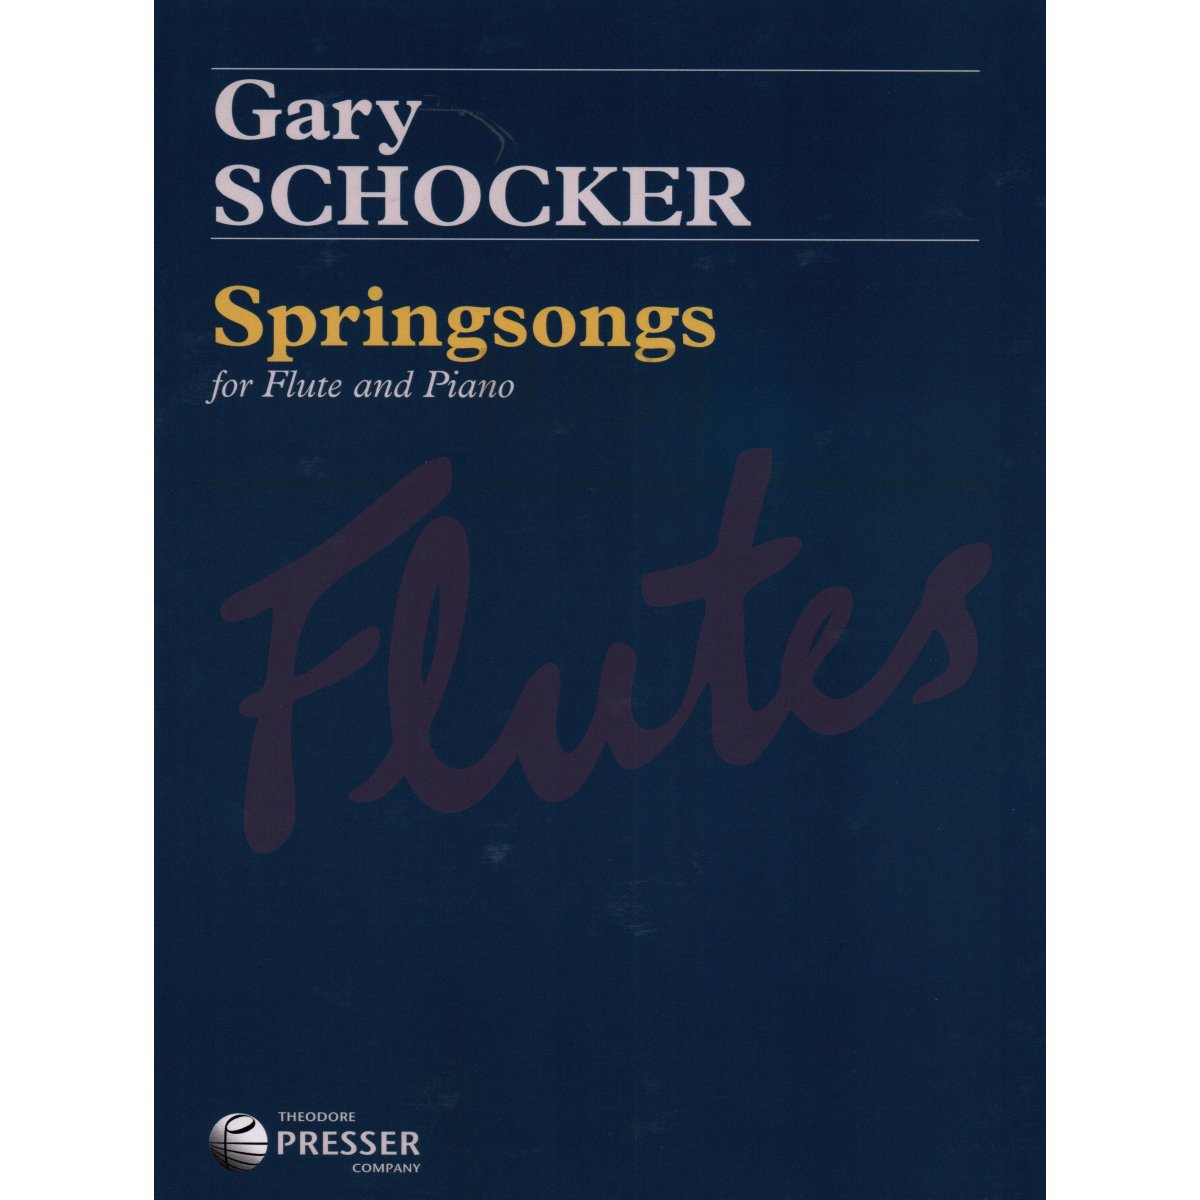 Springsongs for Flute and Piano